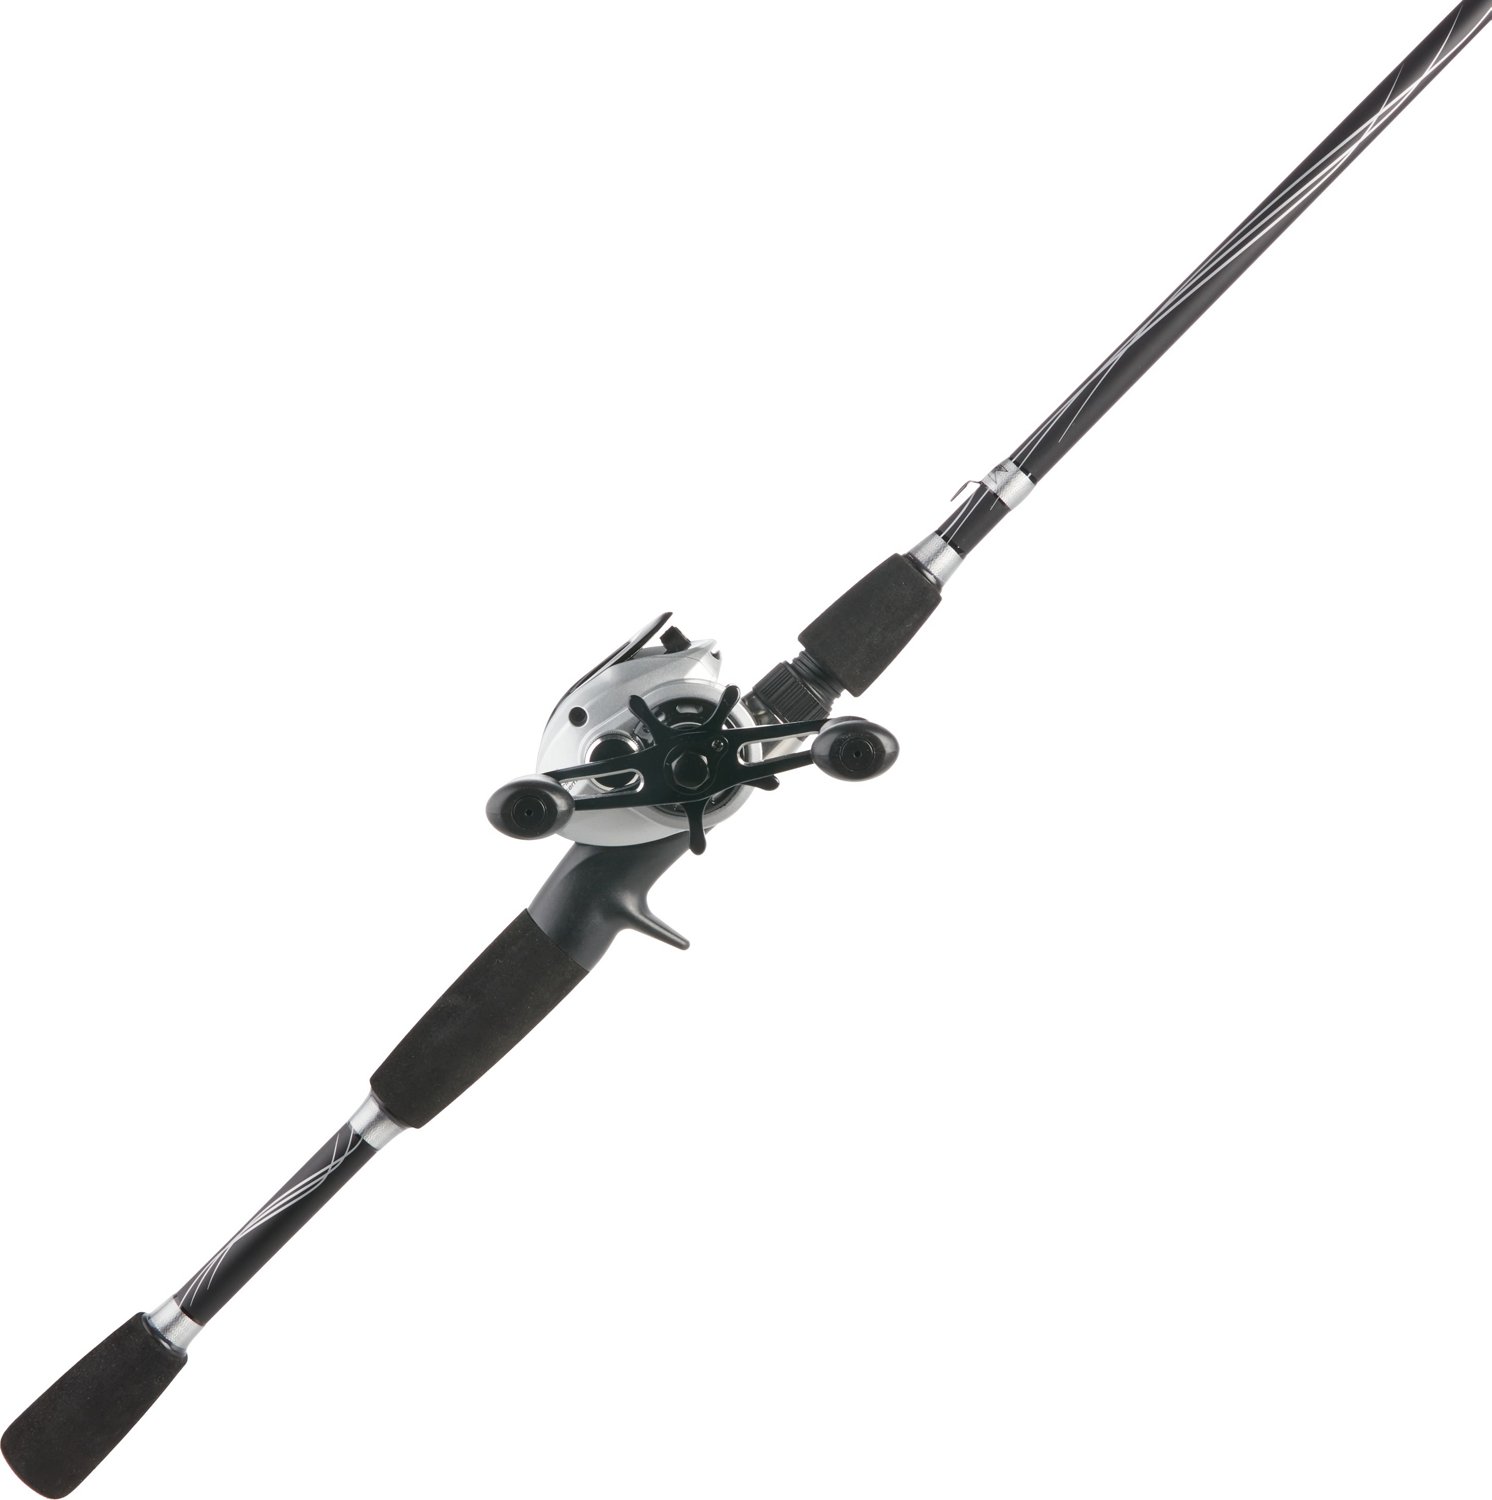 H2O XPRESS Blade Rod and Reel Combo | Academy